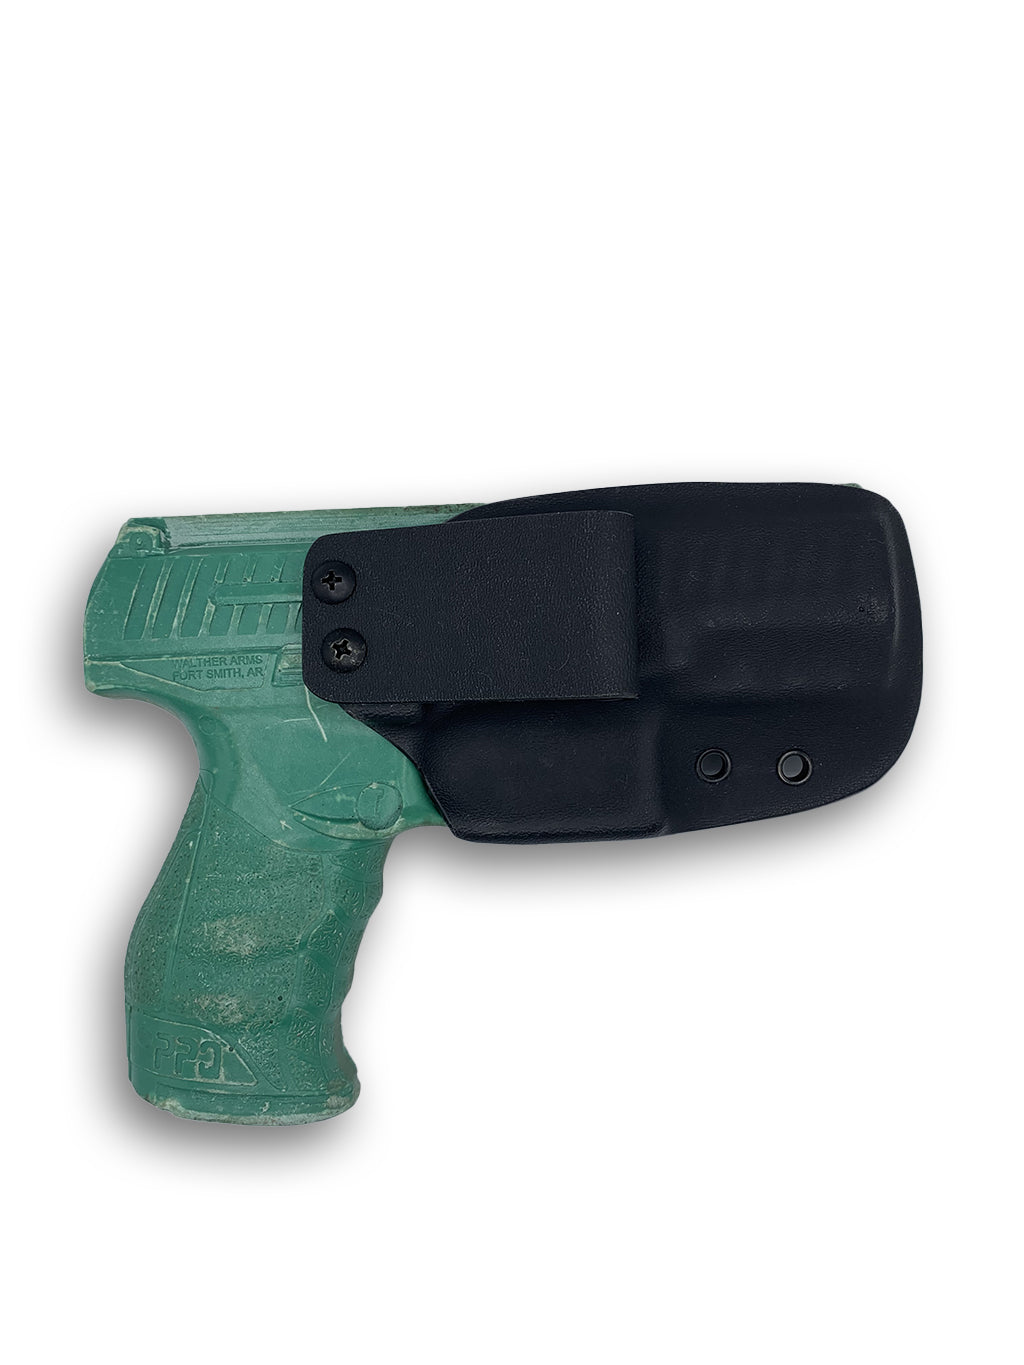 Walther PPQ IWB Holster(Breakout 1.0)